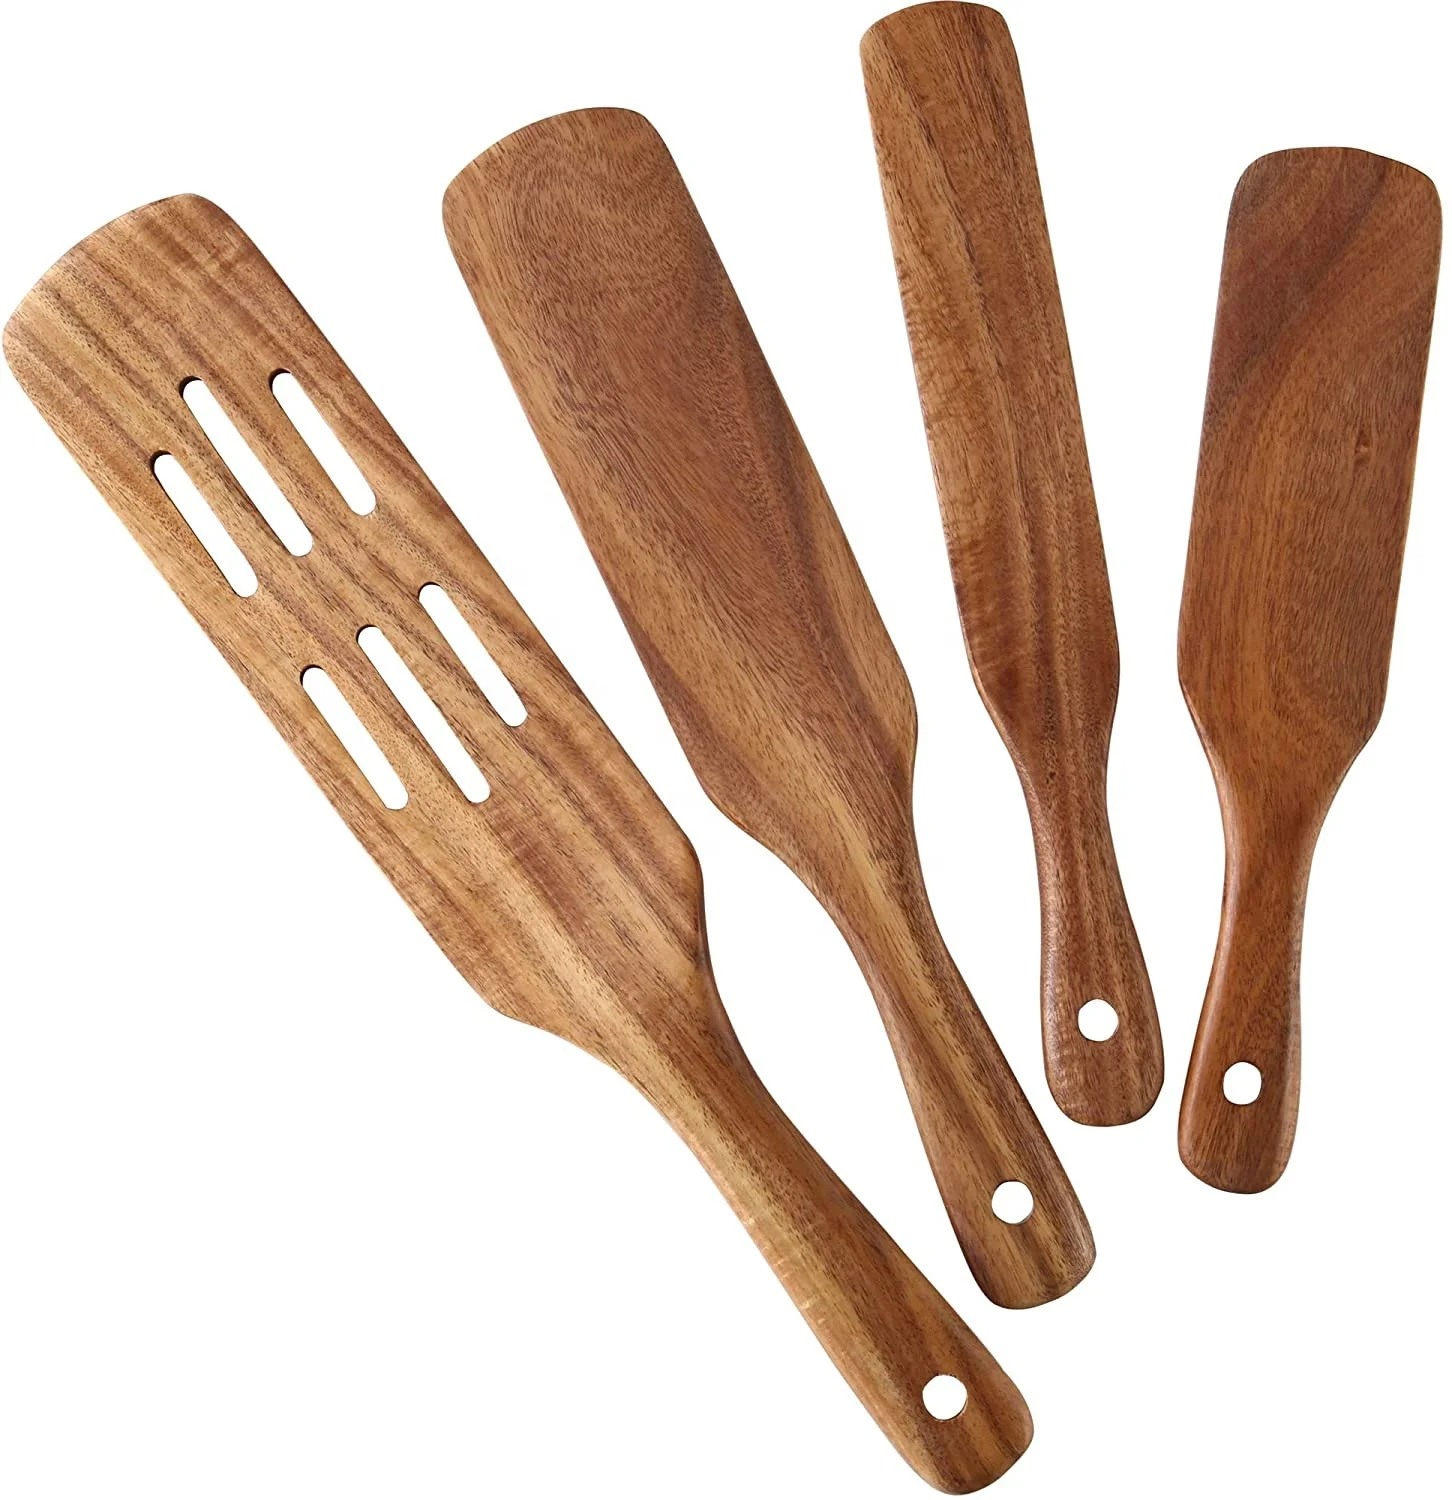 

Natural Teak Spatulas for Cooking Set of 4,Slotted Spurtle Spatula Sets for Stirring, Mixing, Serving (4)